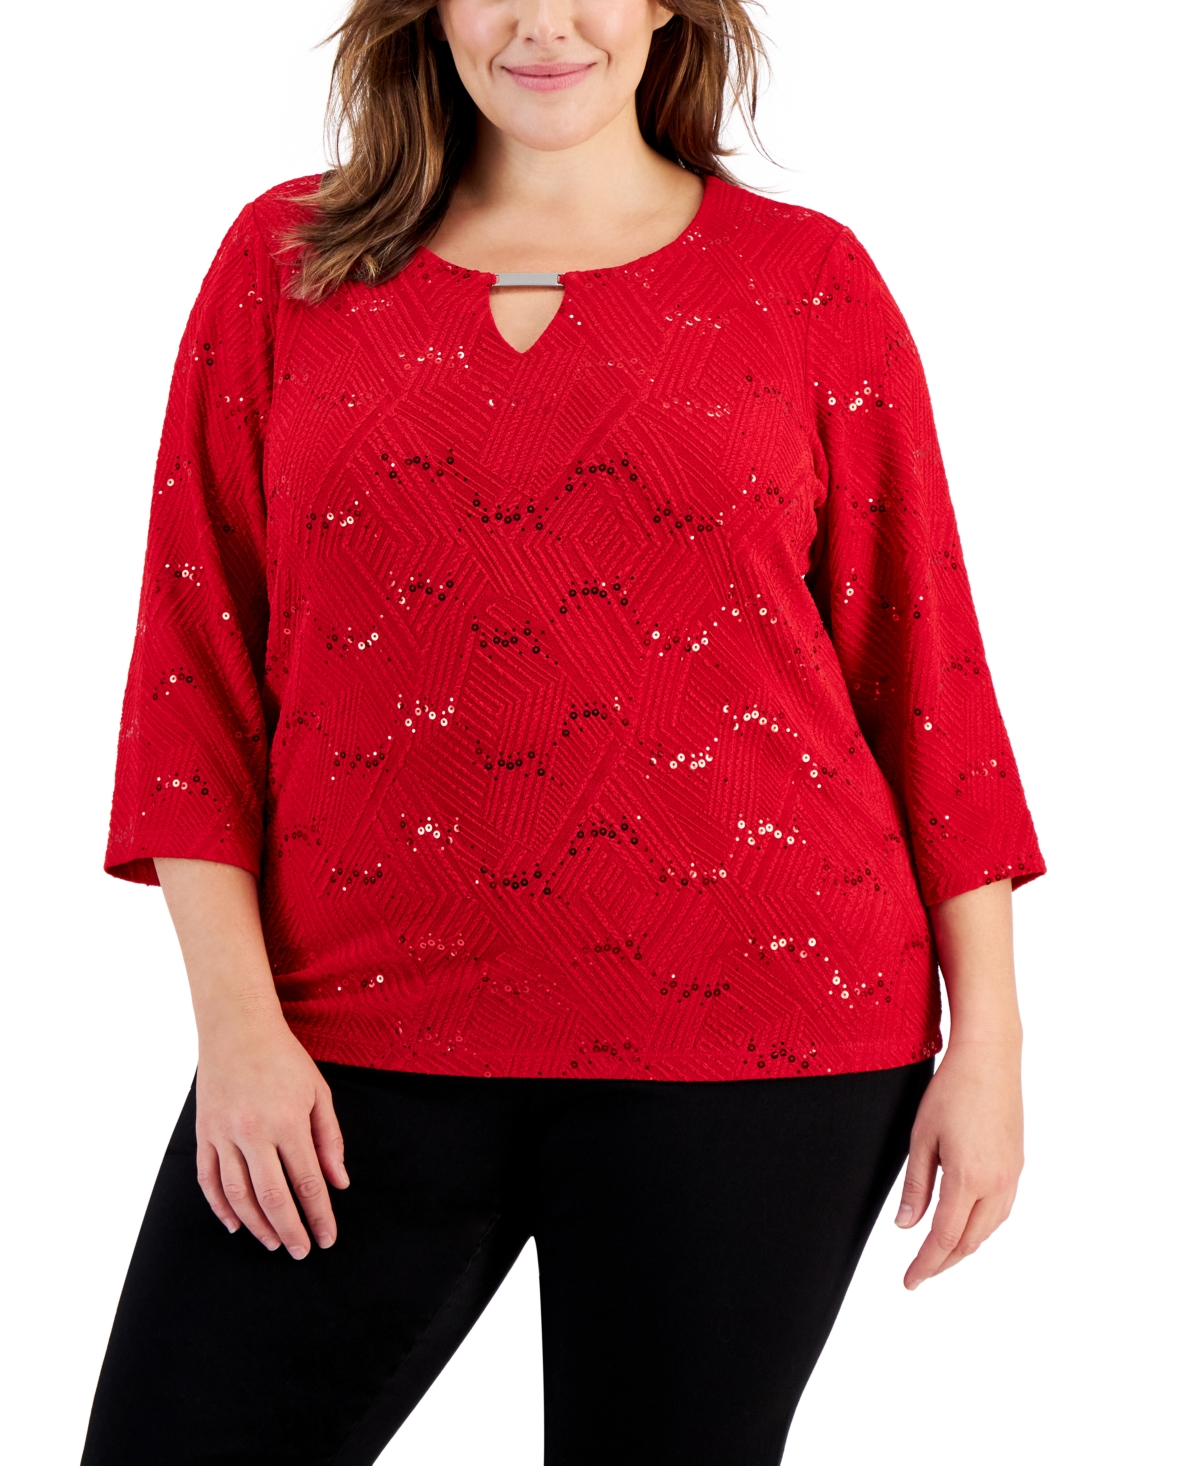 Jm Collection Plus Size Disco Dot Jacquard Top, Created for Macy's